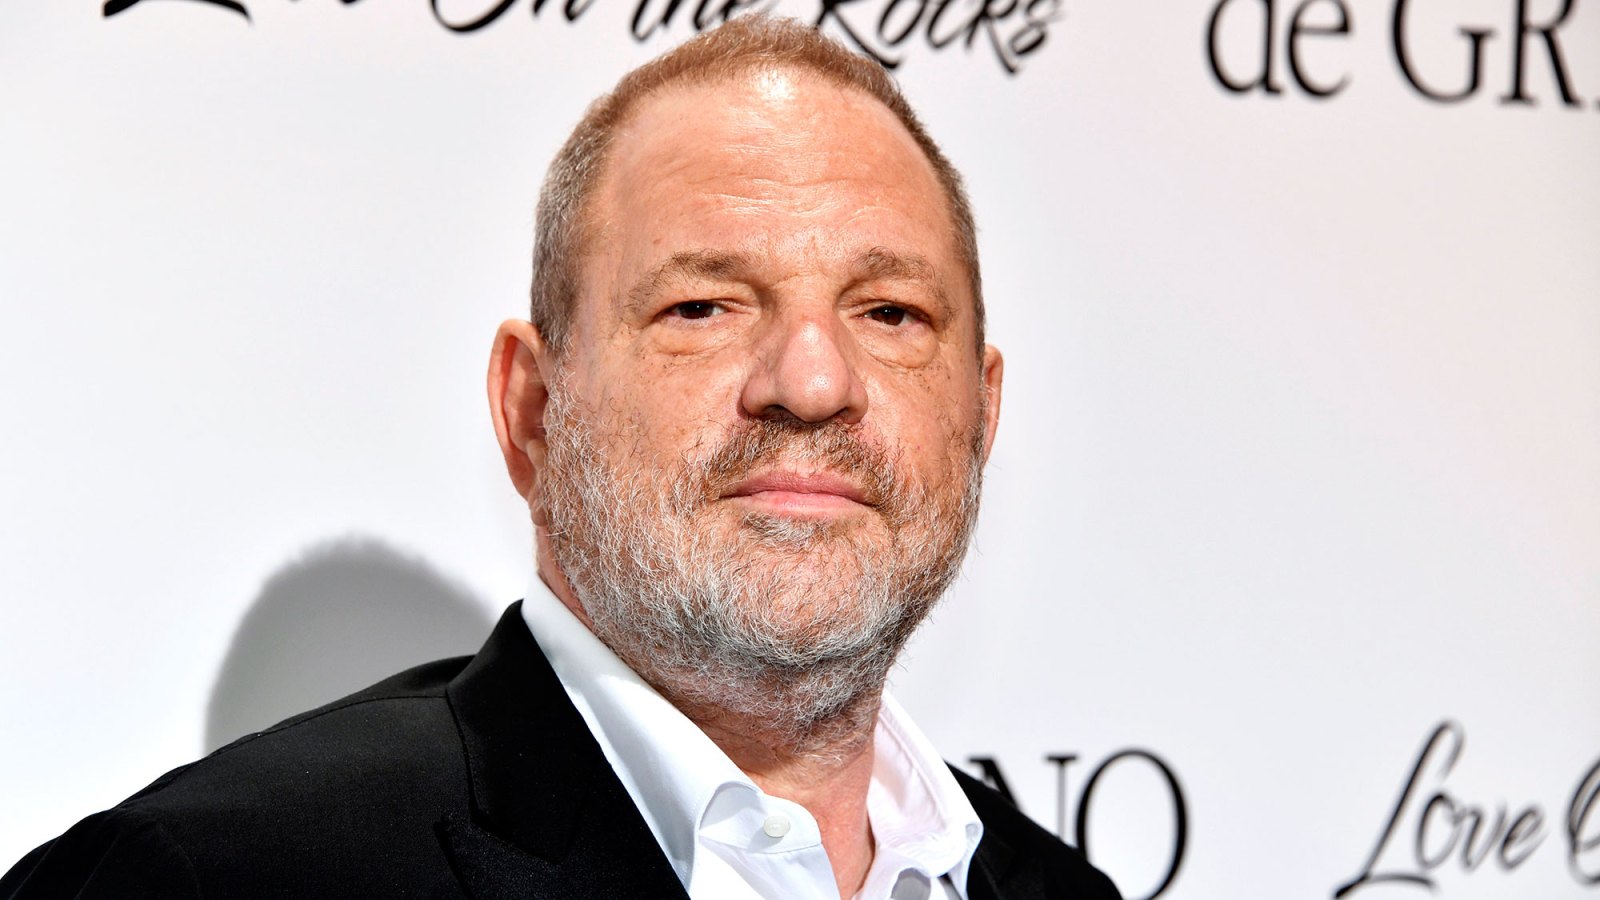 5 Shockers ‘Untouchable,’ the Harvey Weinstein sex abuse expose documentary